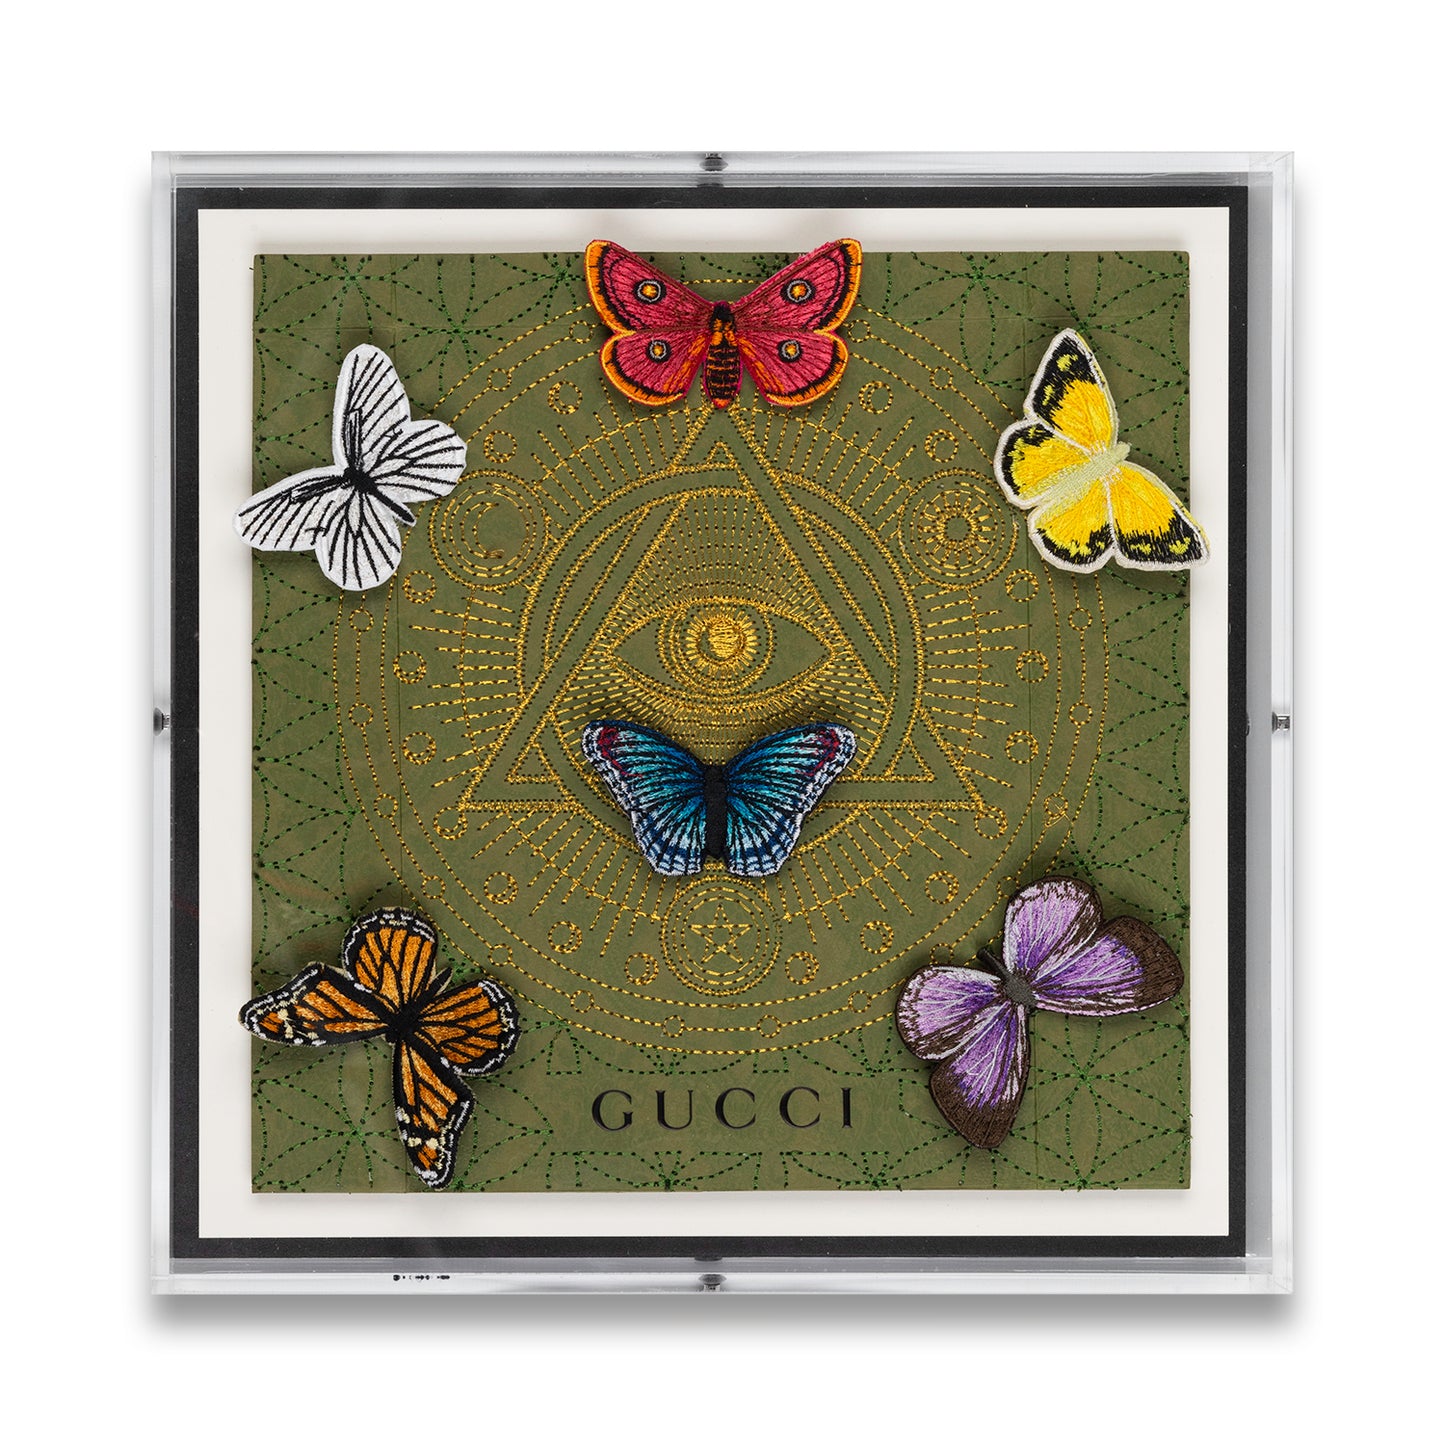 Gucci Eye of Providence by Stephen Wilson 12x12x2"